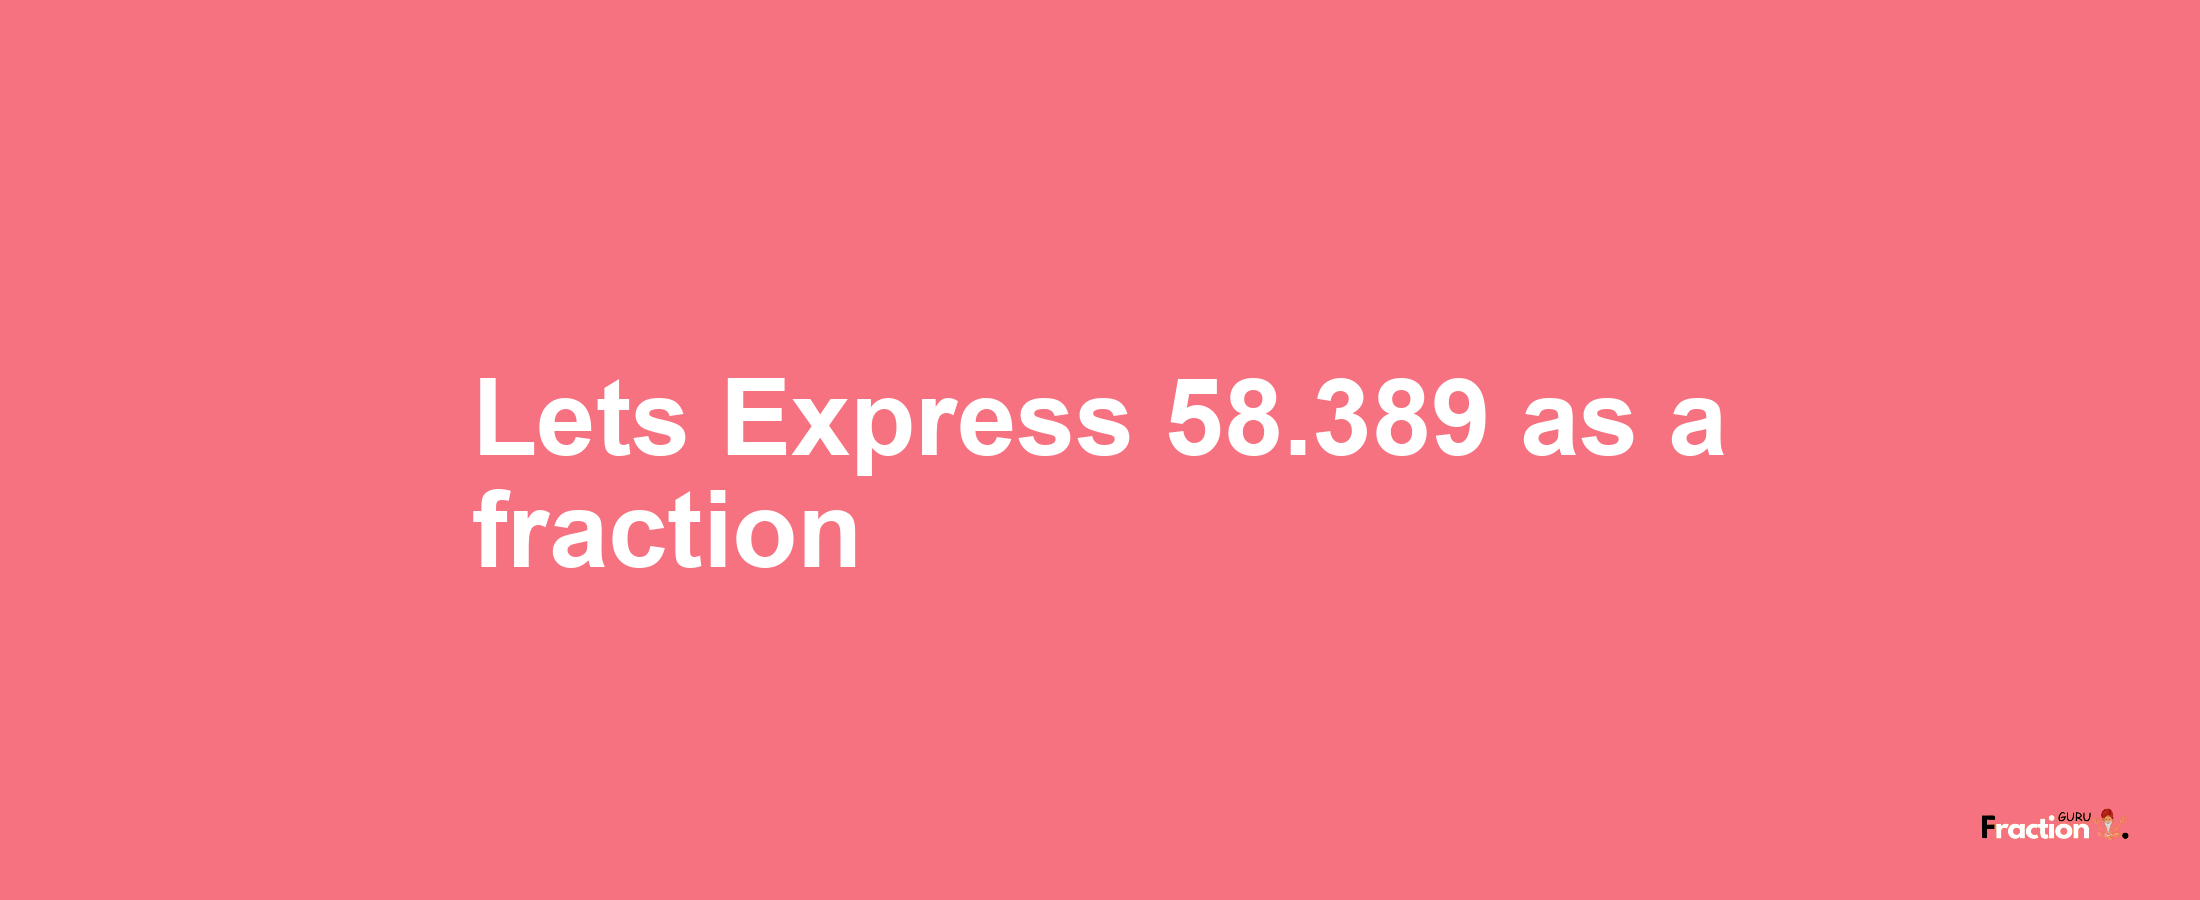 Lets Express 58.389 as afraction